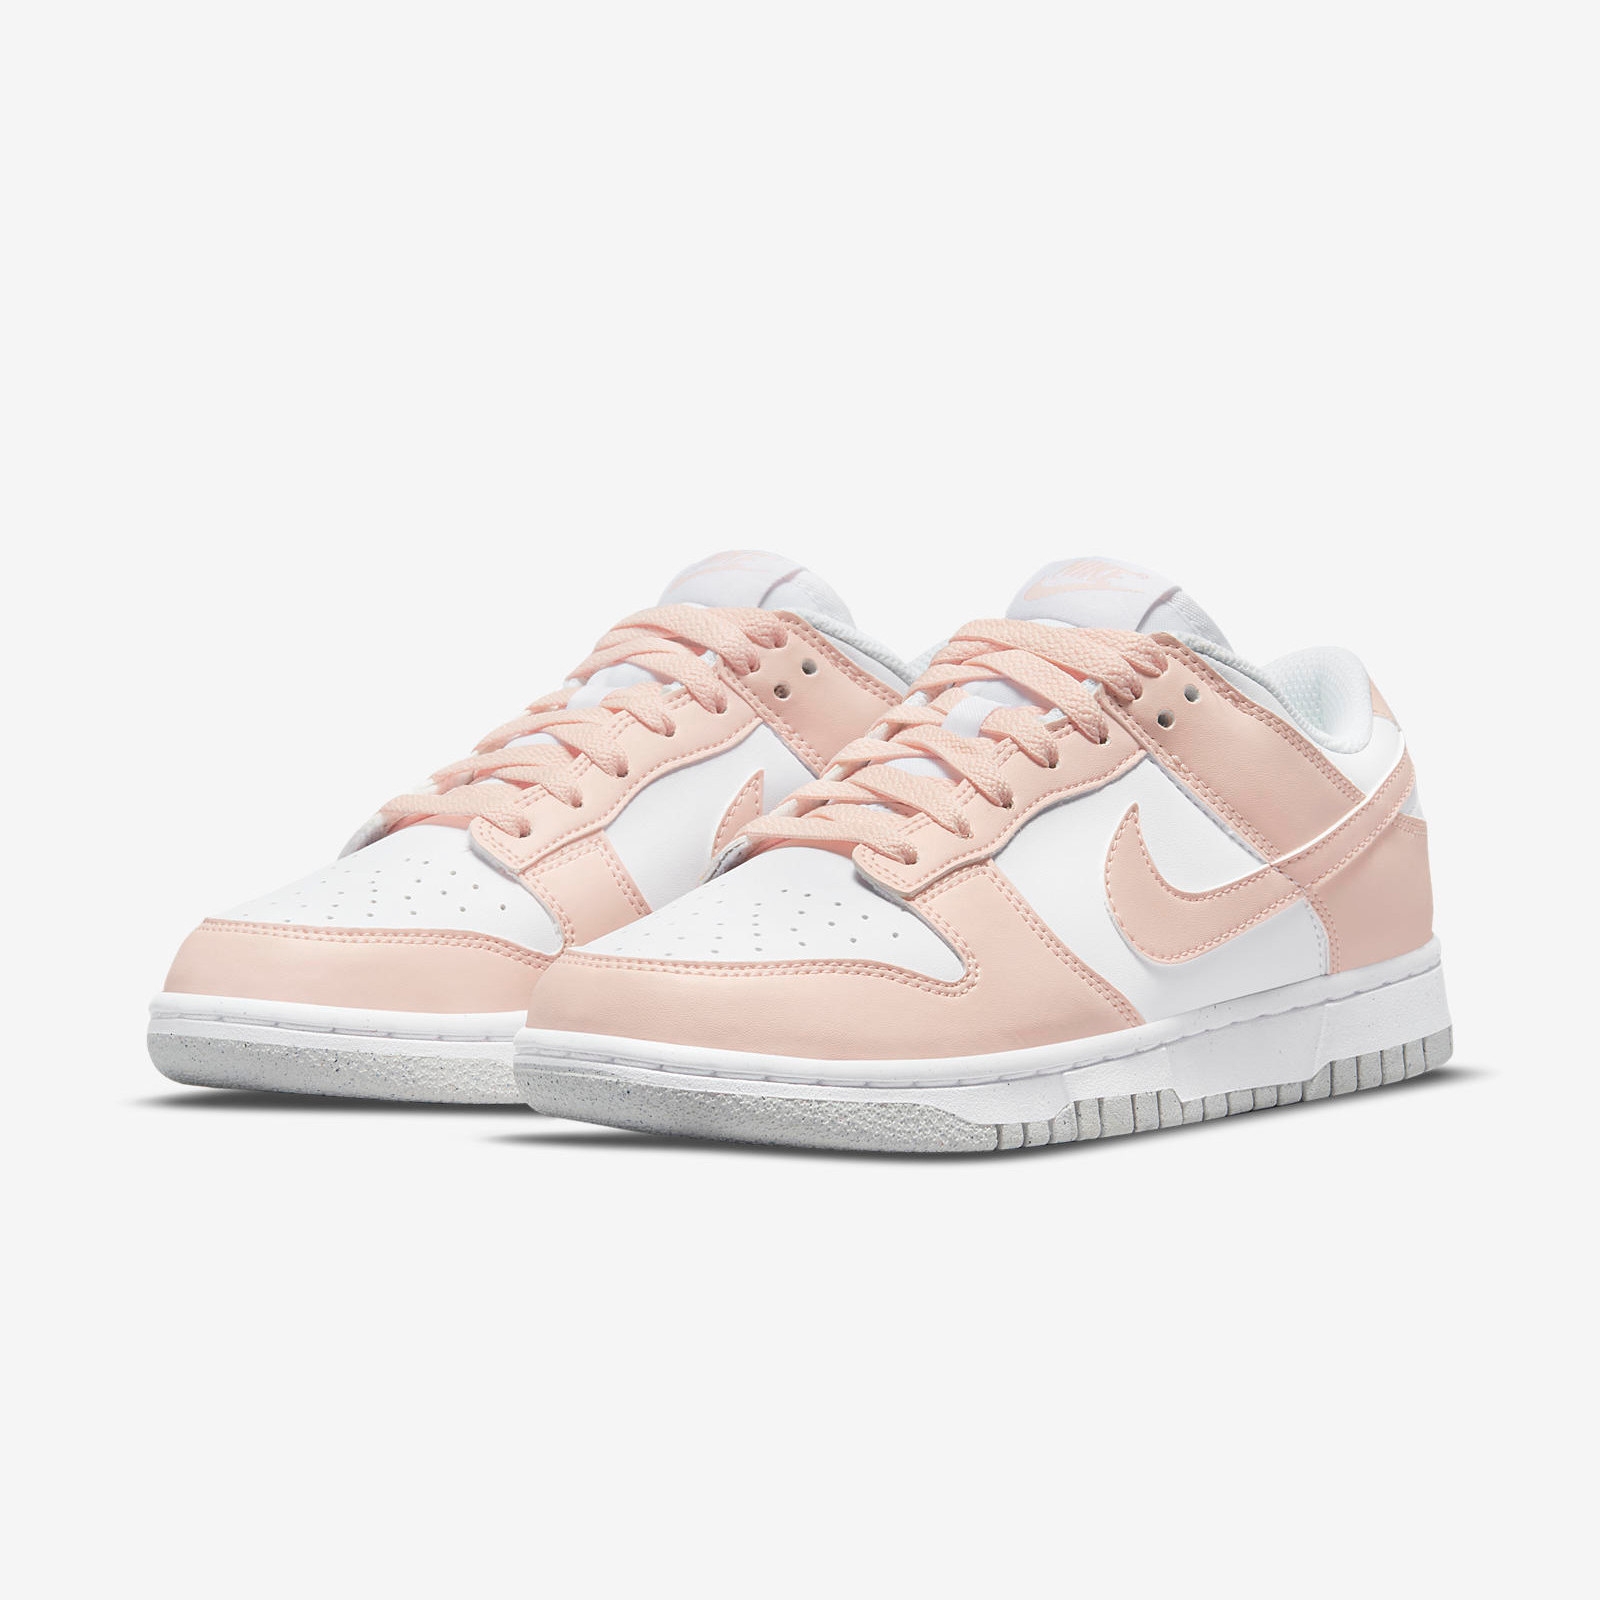 Nike Dunk Low
« Pale Coral »